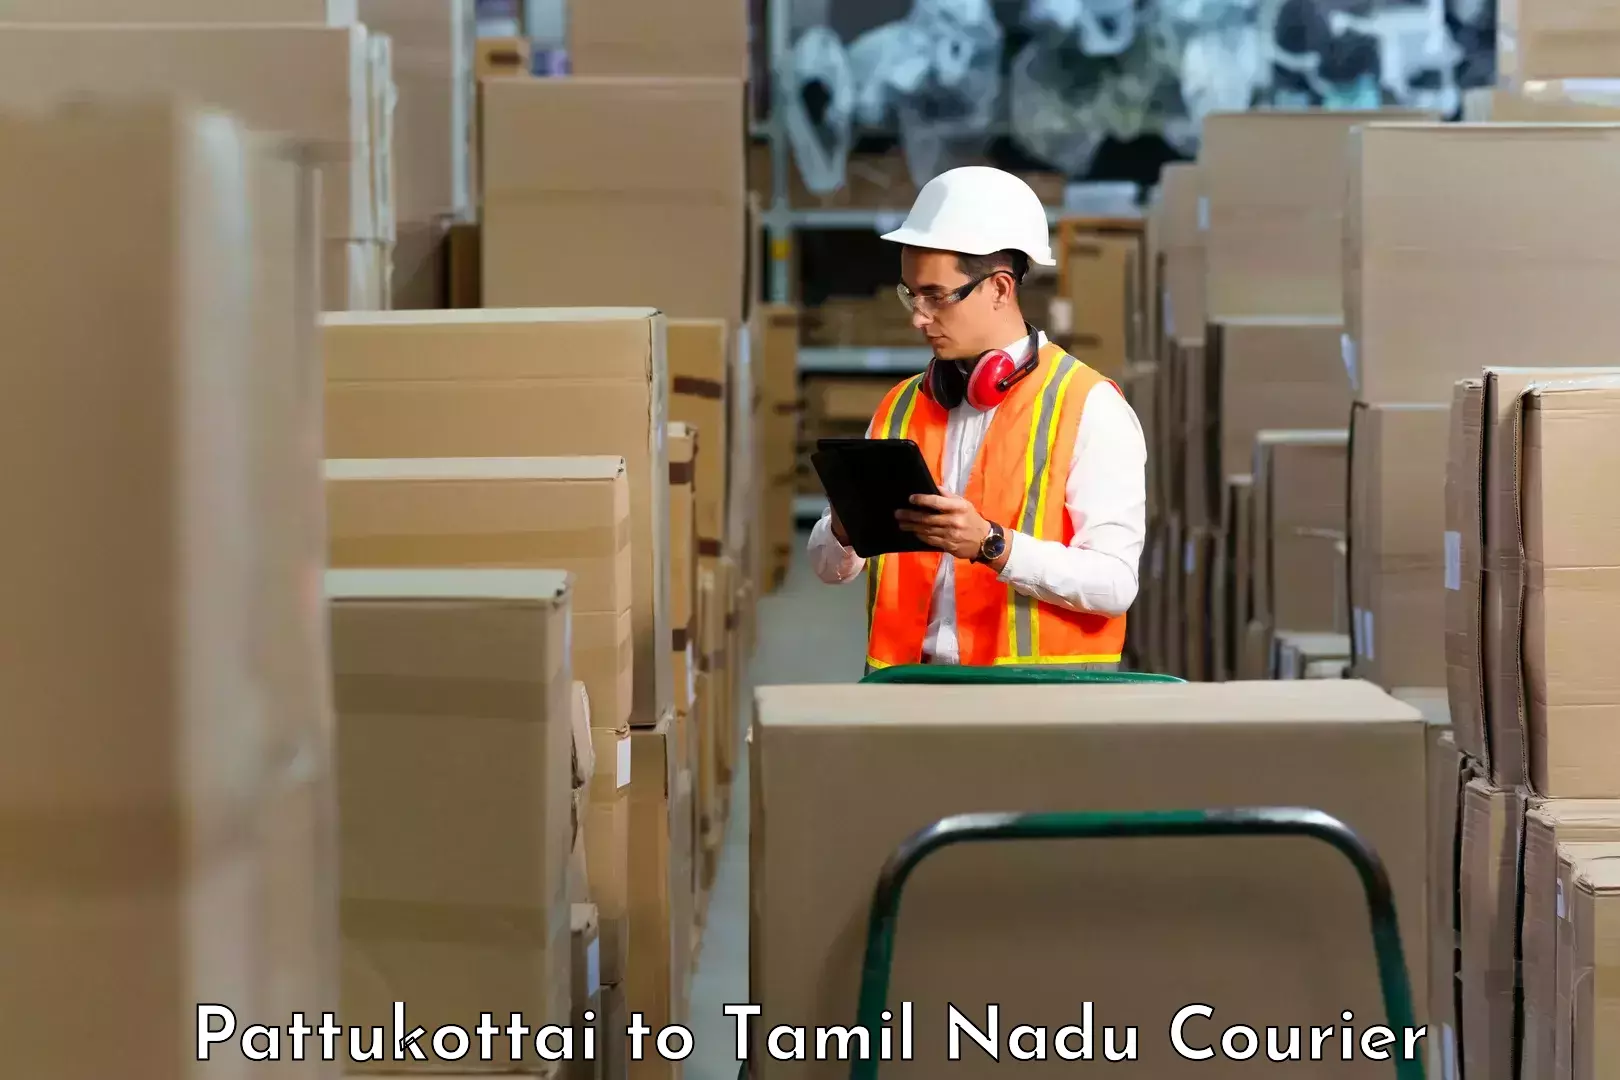 Reliable delivery network Pattukottai to SRM Institute of Science and Technology Chennai